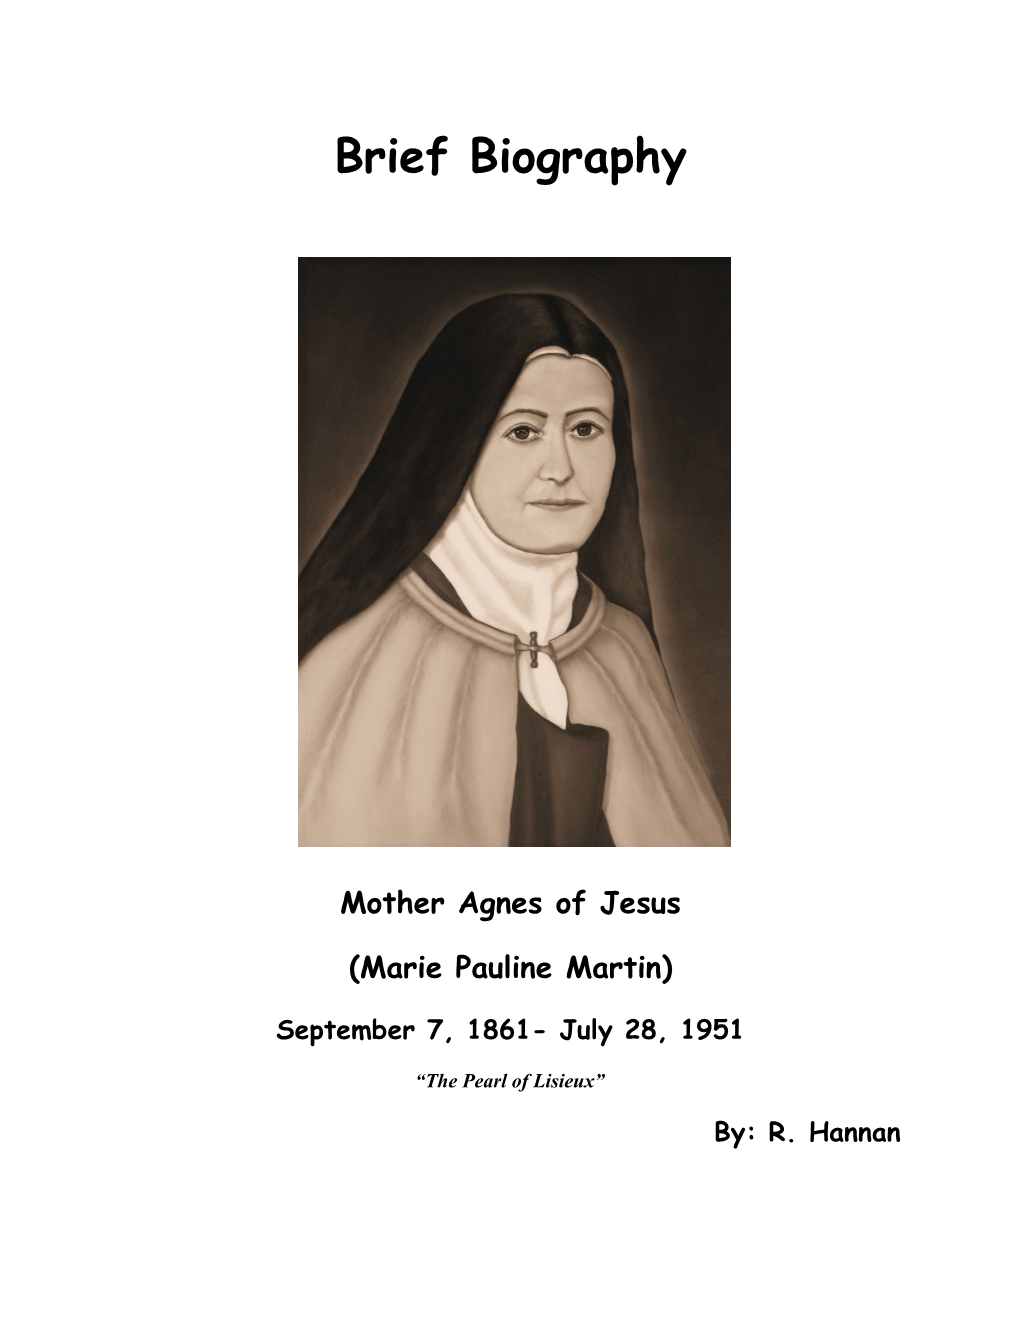 Mother Agnes of Jesus